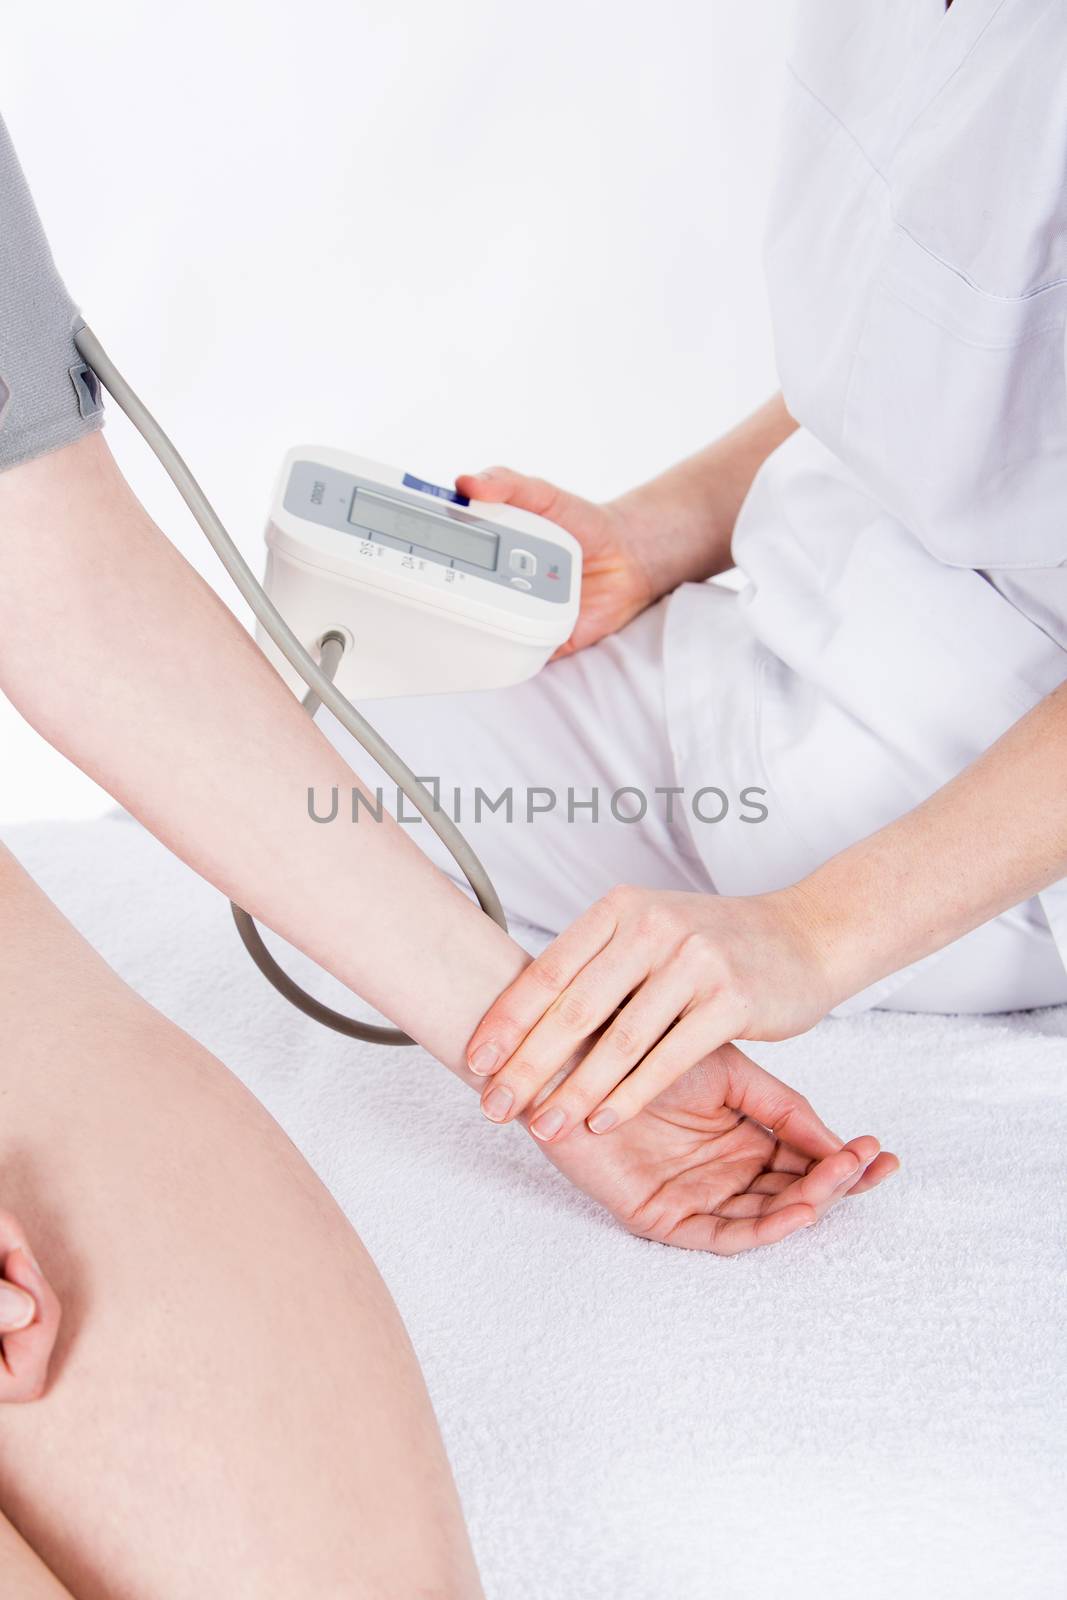 doctor gets measure the pressure to woman patient by Flareimage